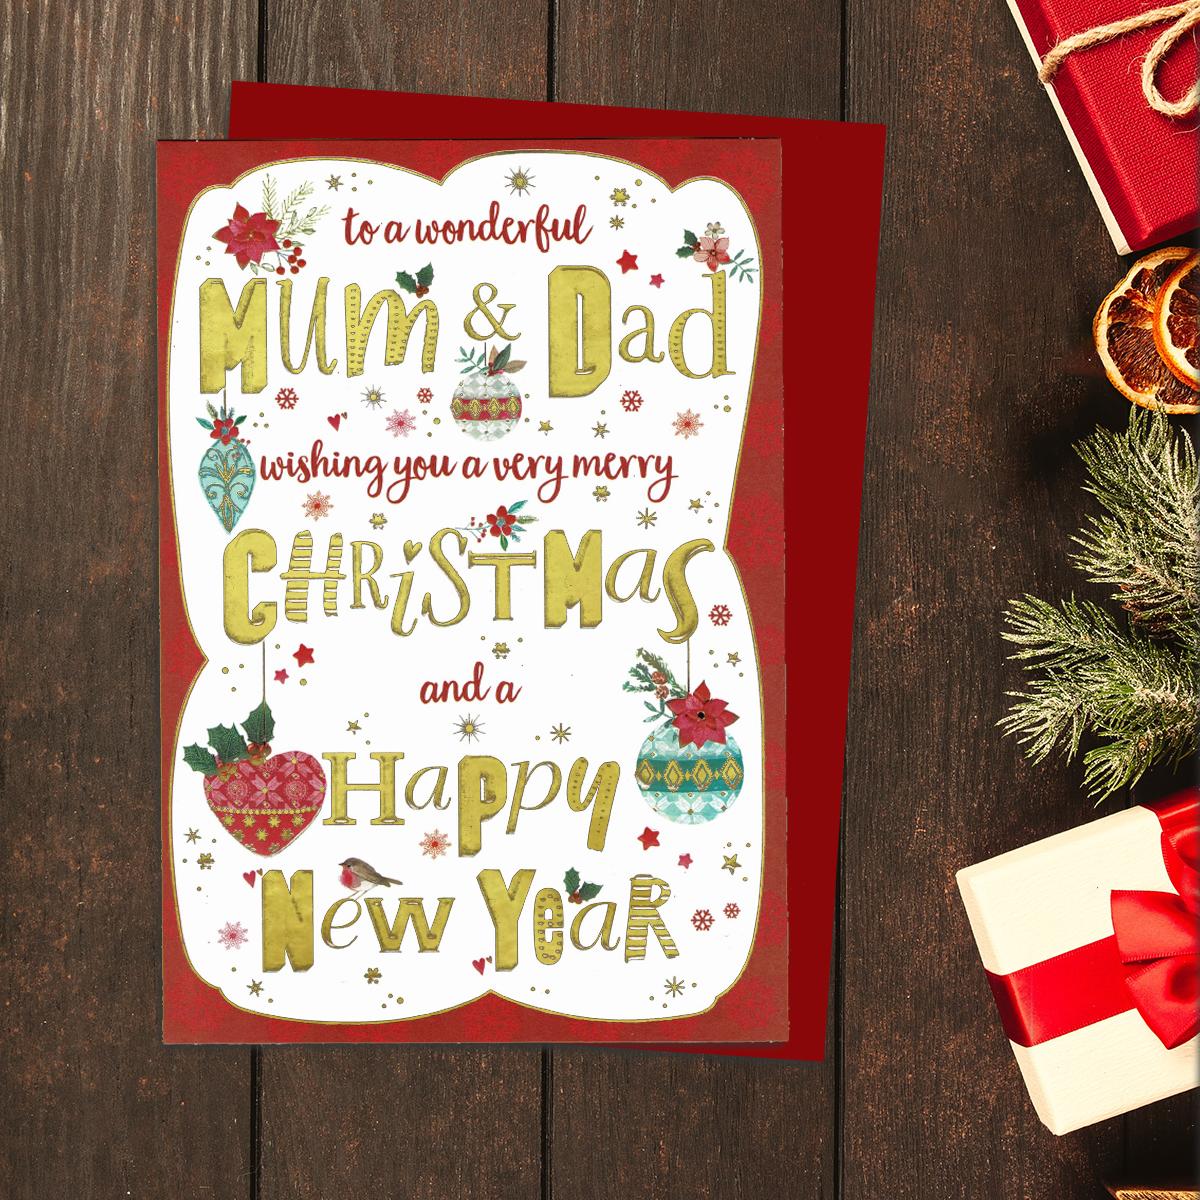 A Red Bordered Christmas Card With -To A Wonderful Mum & Dad Wishing You A Merry Christmas And A Happy New Year- In Gold Foiling On The Front. Complete With Bauble Images And Red Envelope